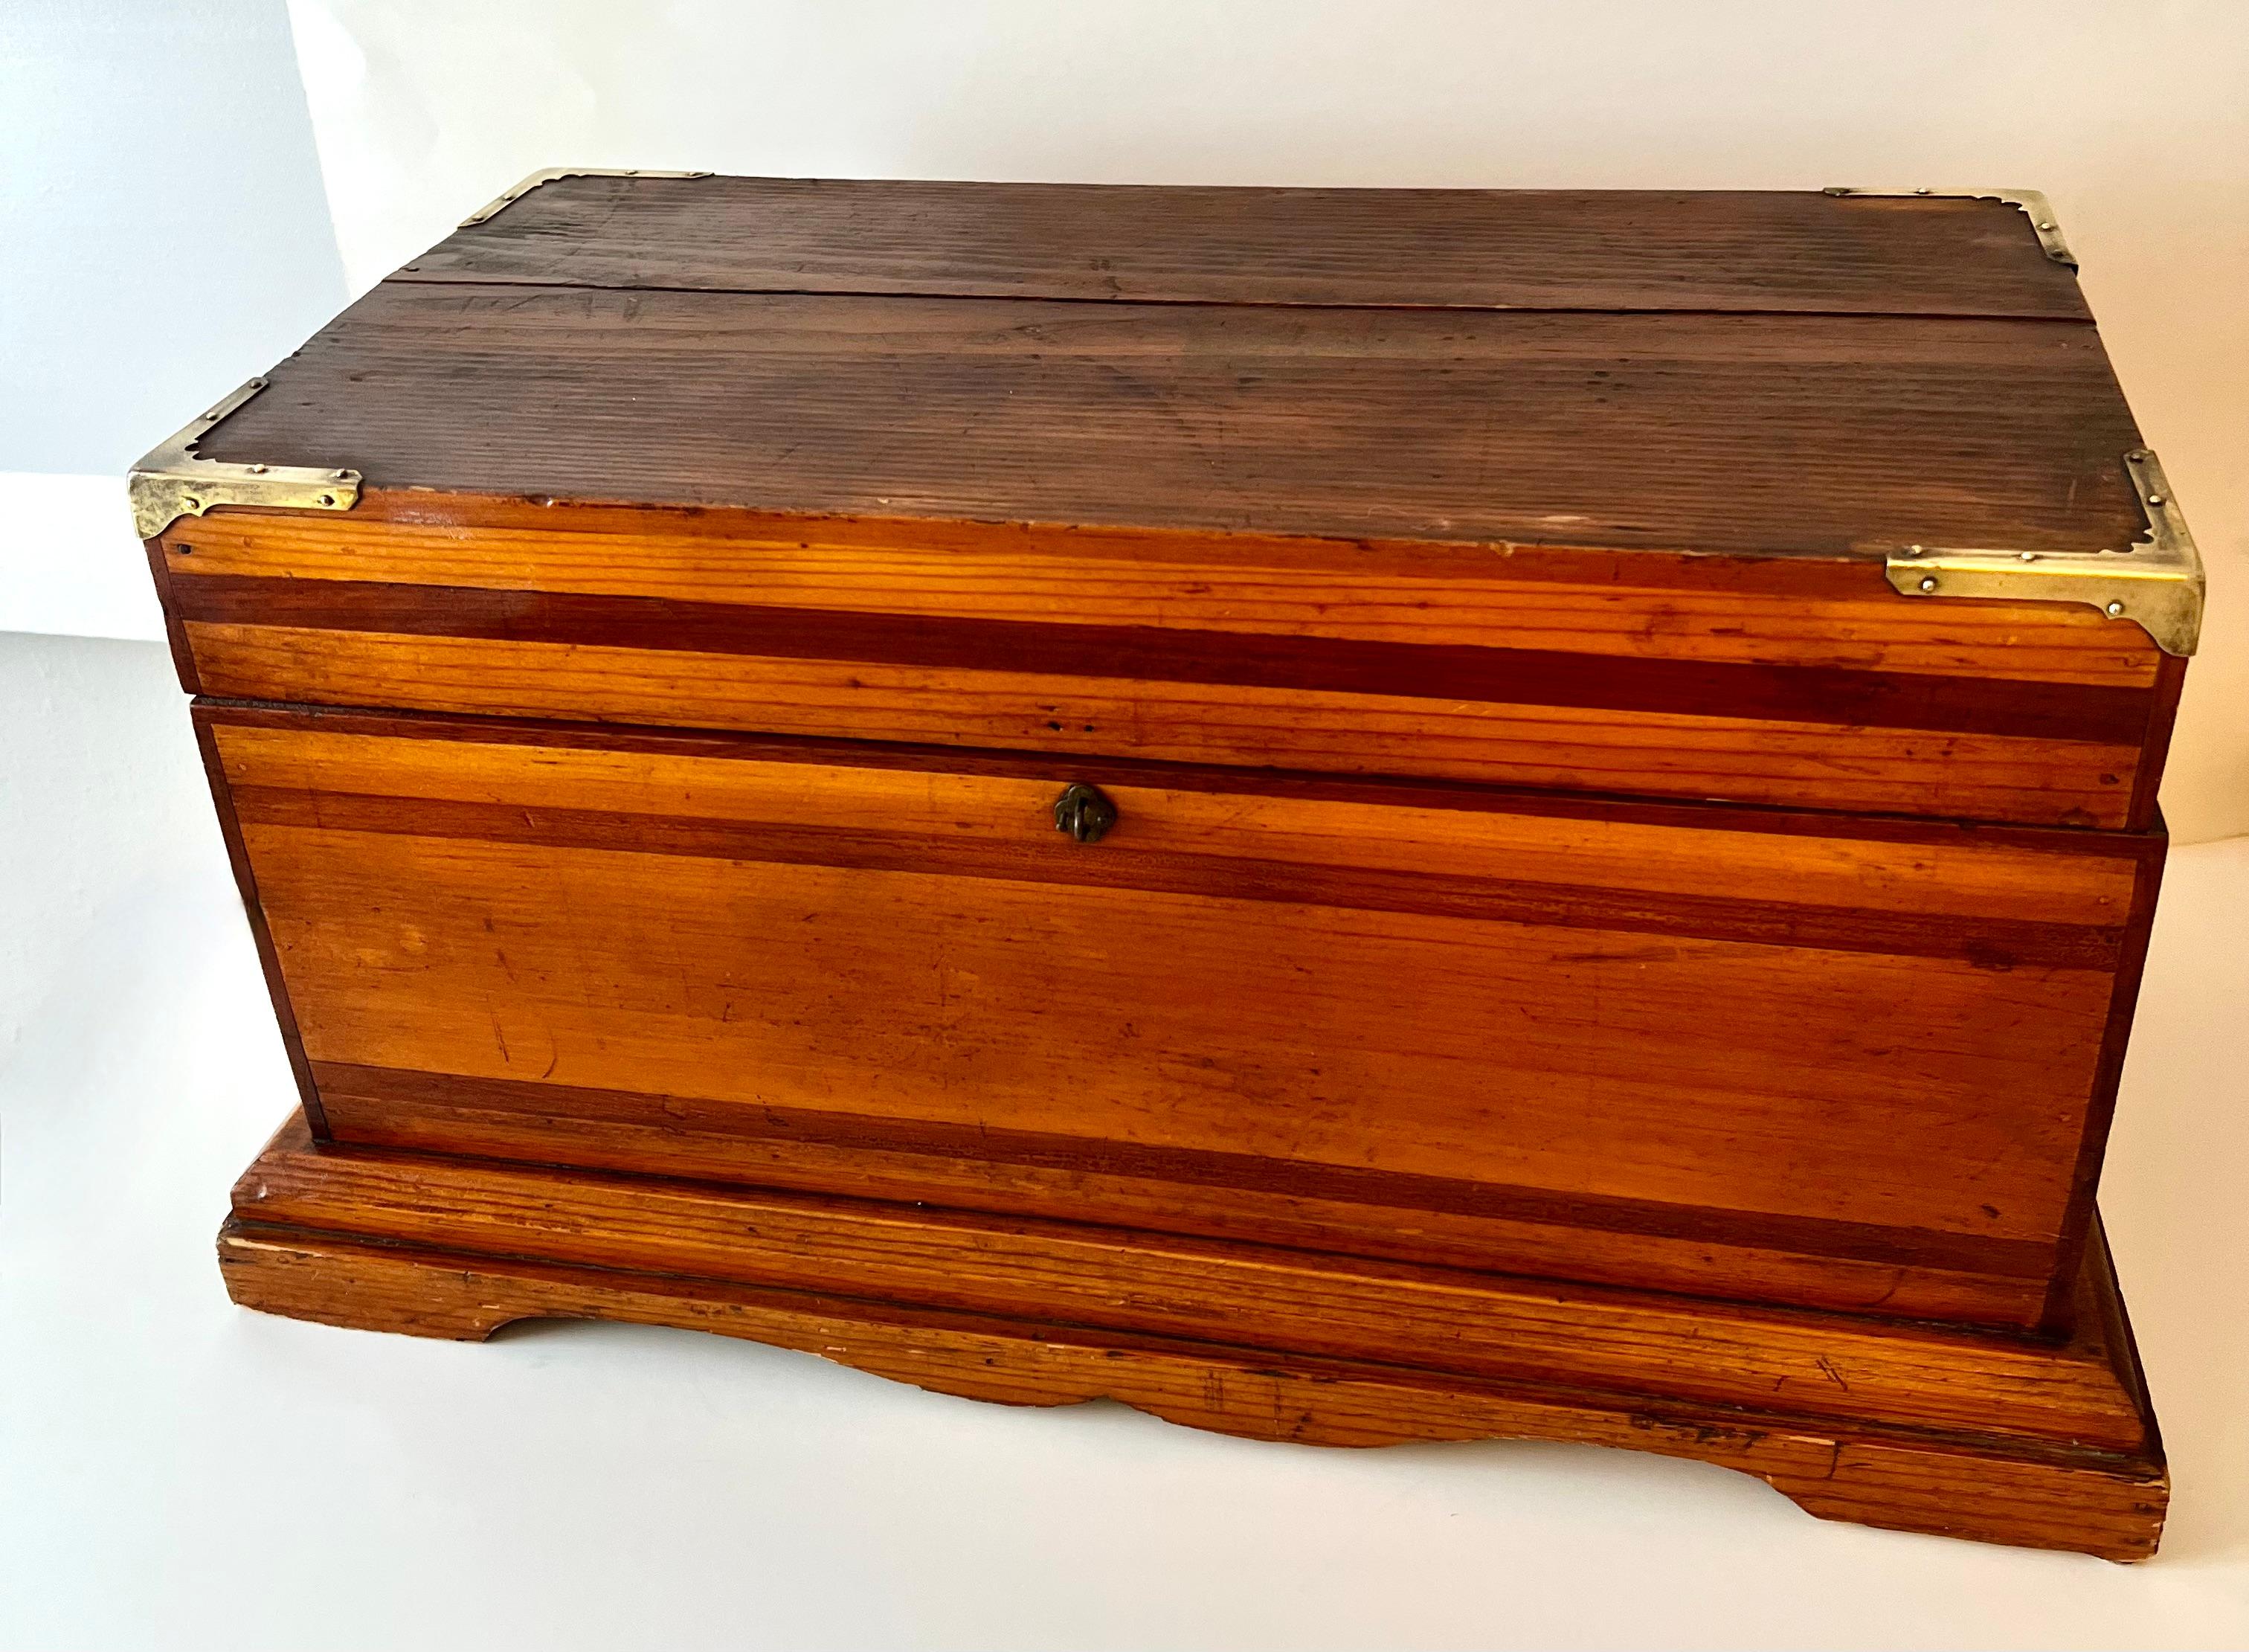 Wooden had made box with brass top corners - decorative and great storage too... The use of multiple woods and interesting base makes this piece a great addition to any counter, shelf or console. 

A compliment to a rustic environment or